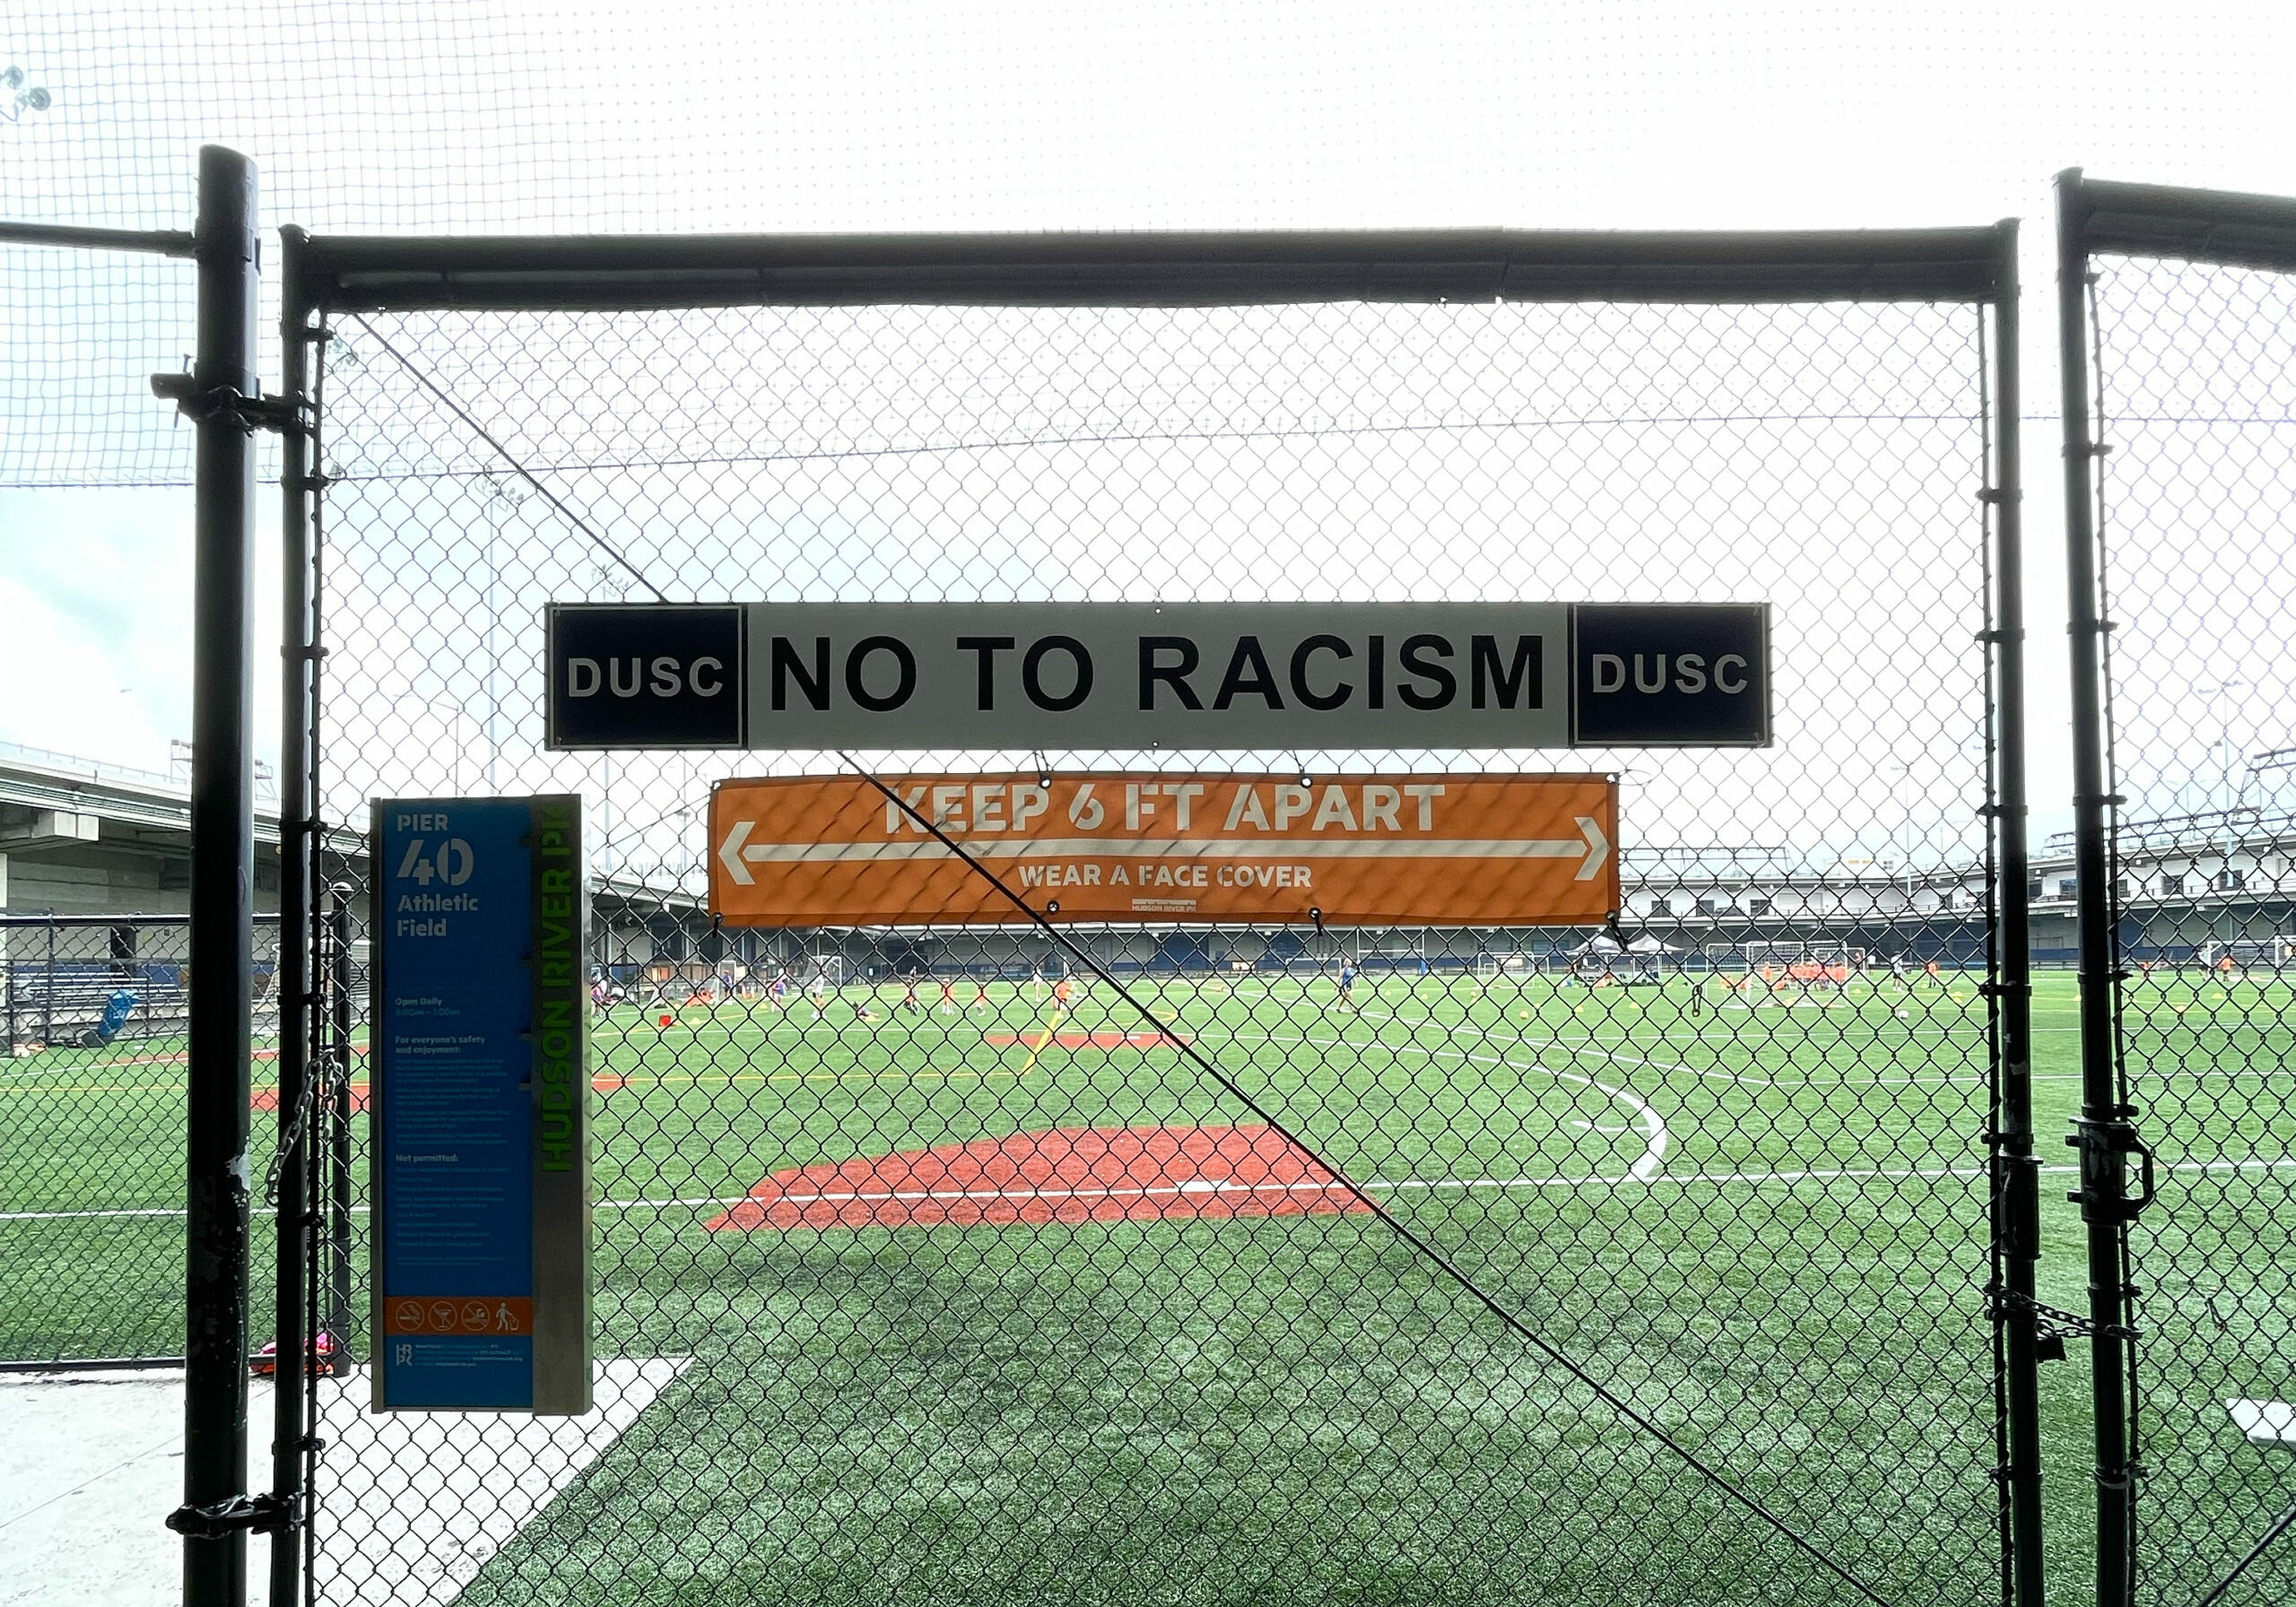 DUSC No to Racism